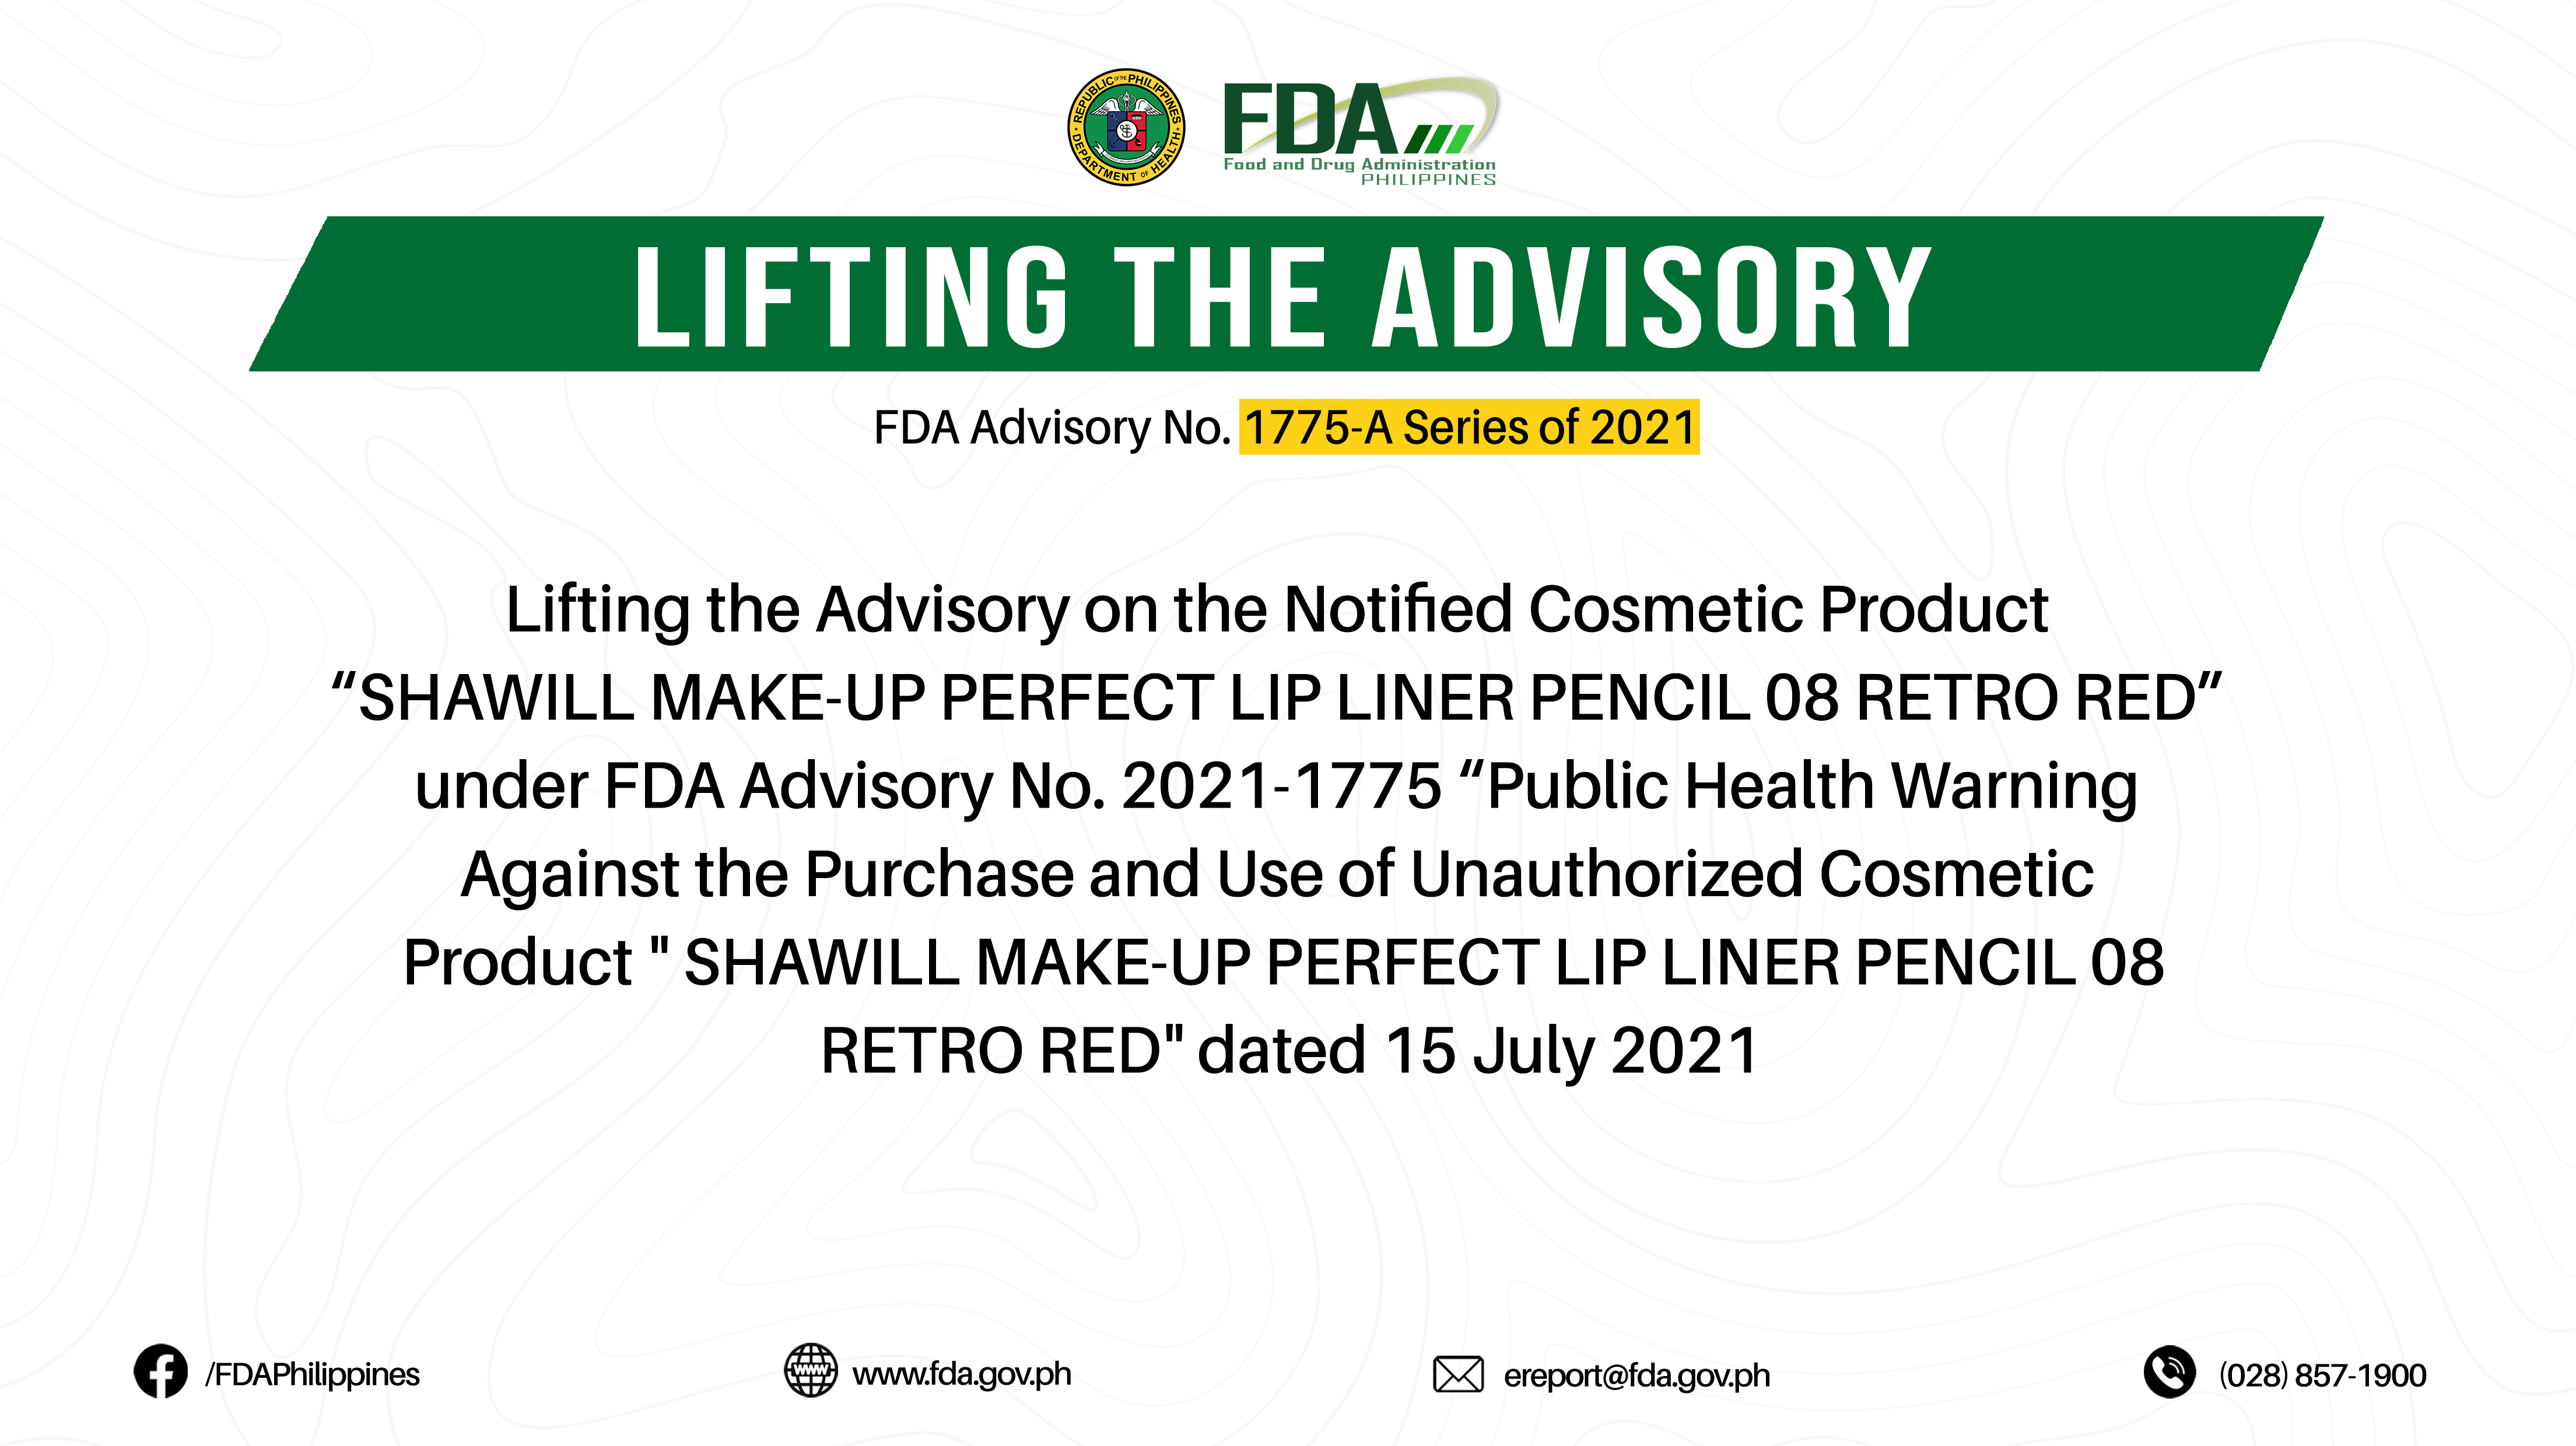 FDA Advisory No.2022-1775-A || Lifting the Advisory on the Notified Cosmetic Product “SHAWILL MAKE-UP PERFECT LIP LINER PENCIL 08 RETRO RED” under FDA Advisory No. 2021-1775 “Public Health Warning Against the Purchase and Use of Unauthorized Cosmetic Product ” SHAWILL MAKE-UP PERFECT LIP LINER PENCIL 08 RETRO RED” dated 15 July 2021